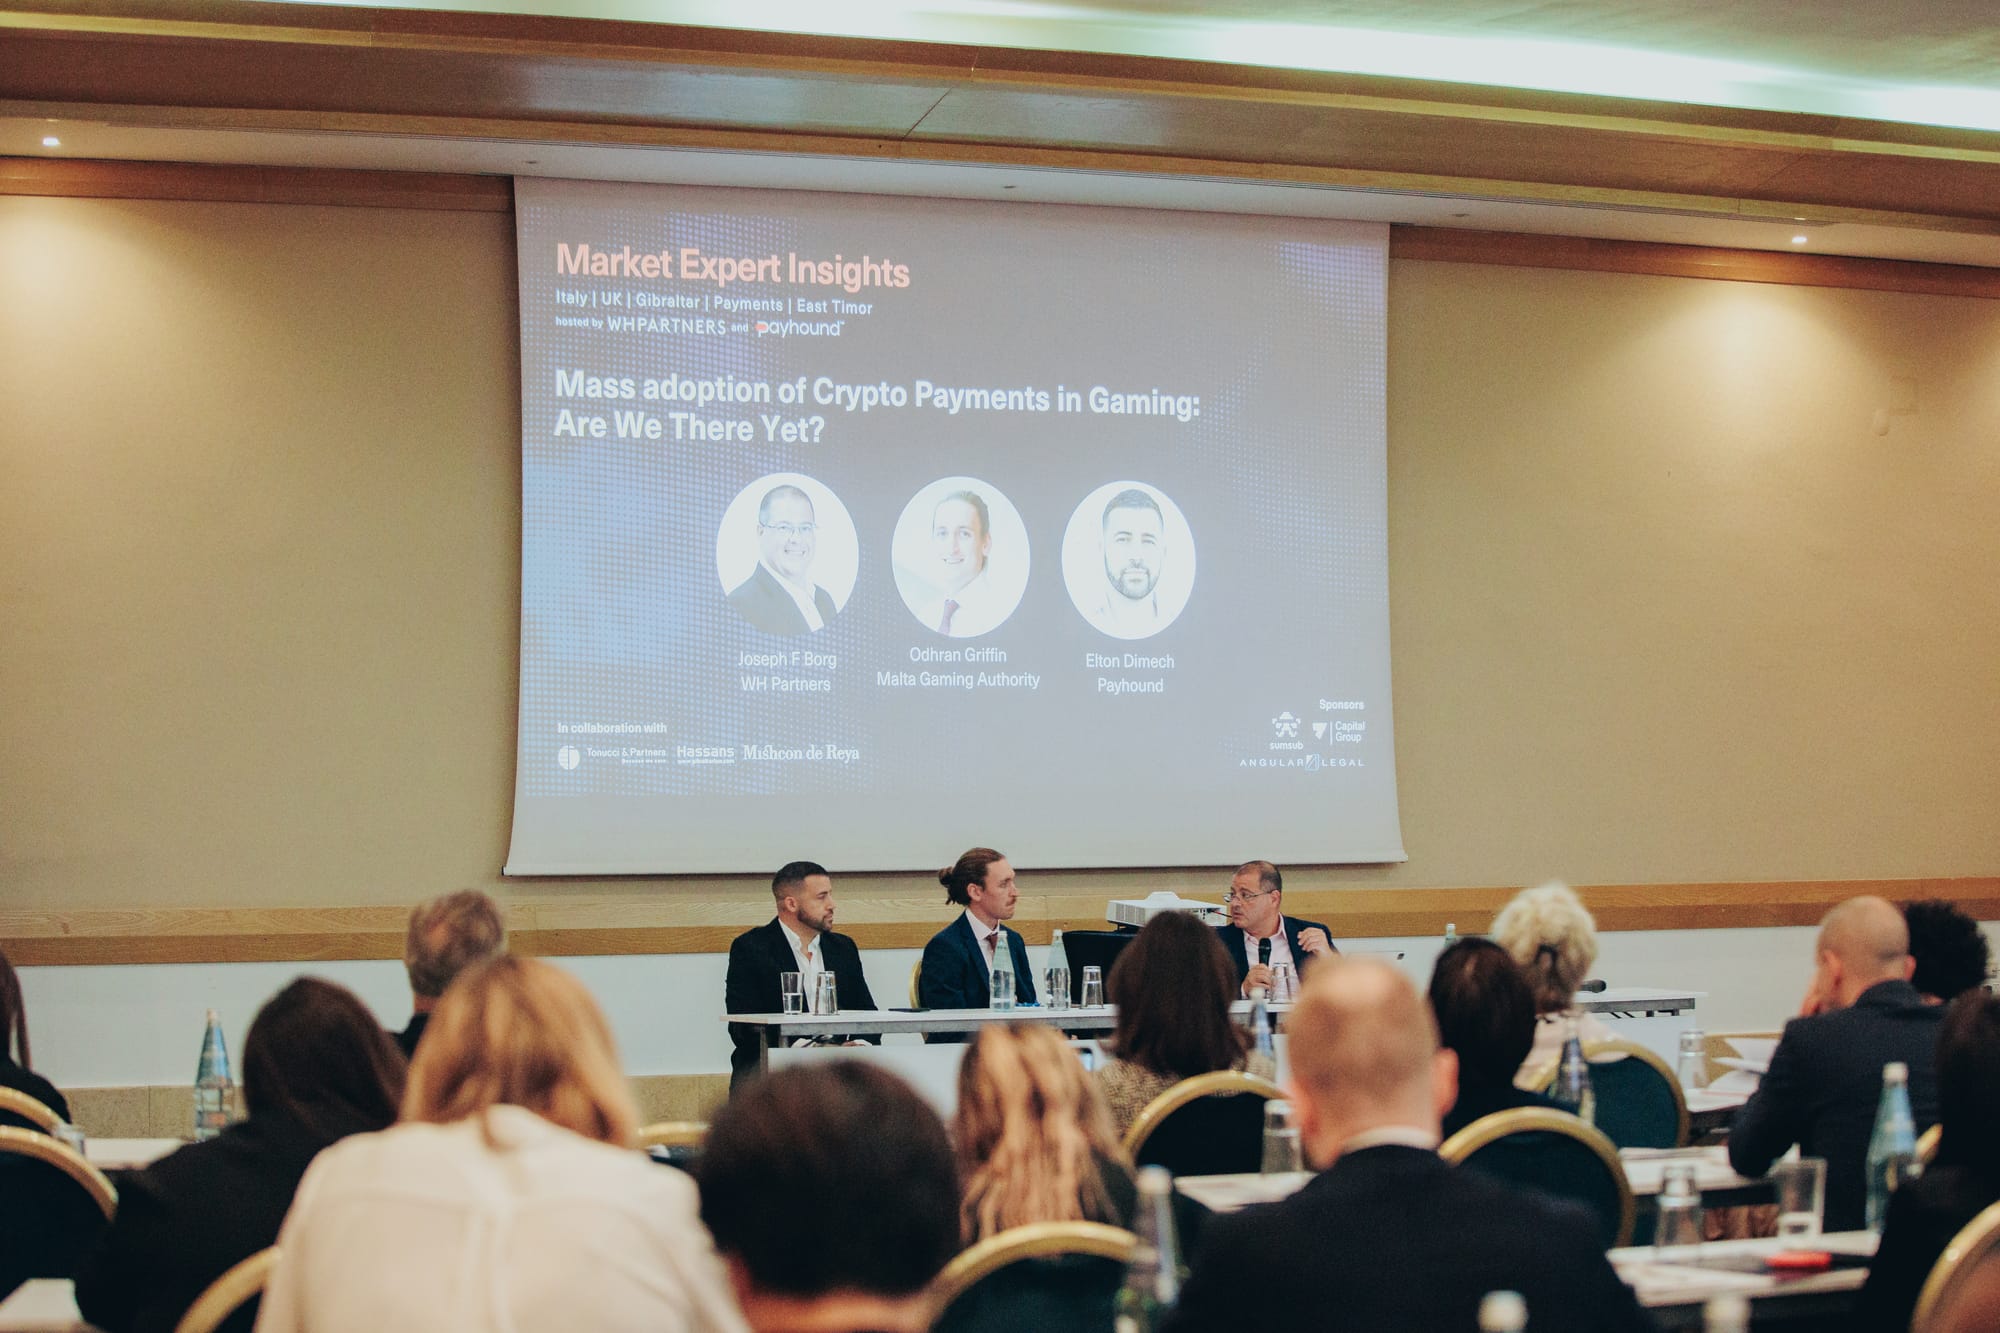 WH Partners and Payhound hosted Market Expert Insights during SiGMA Week